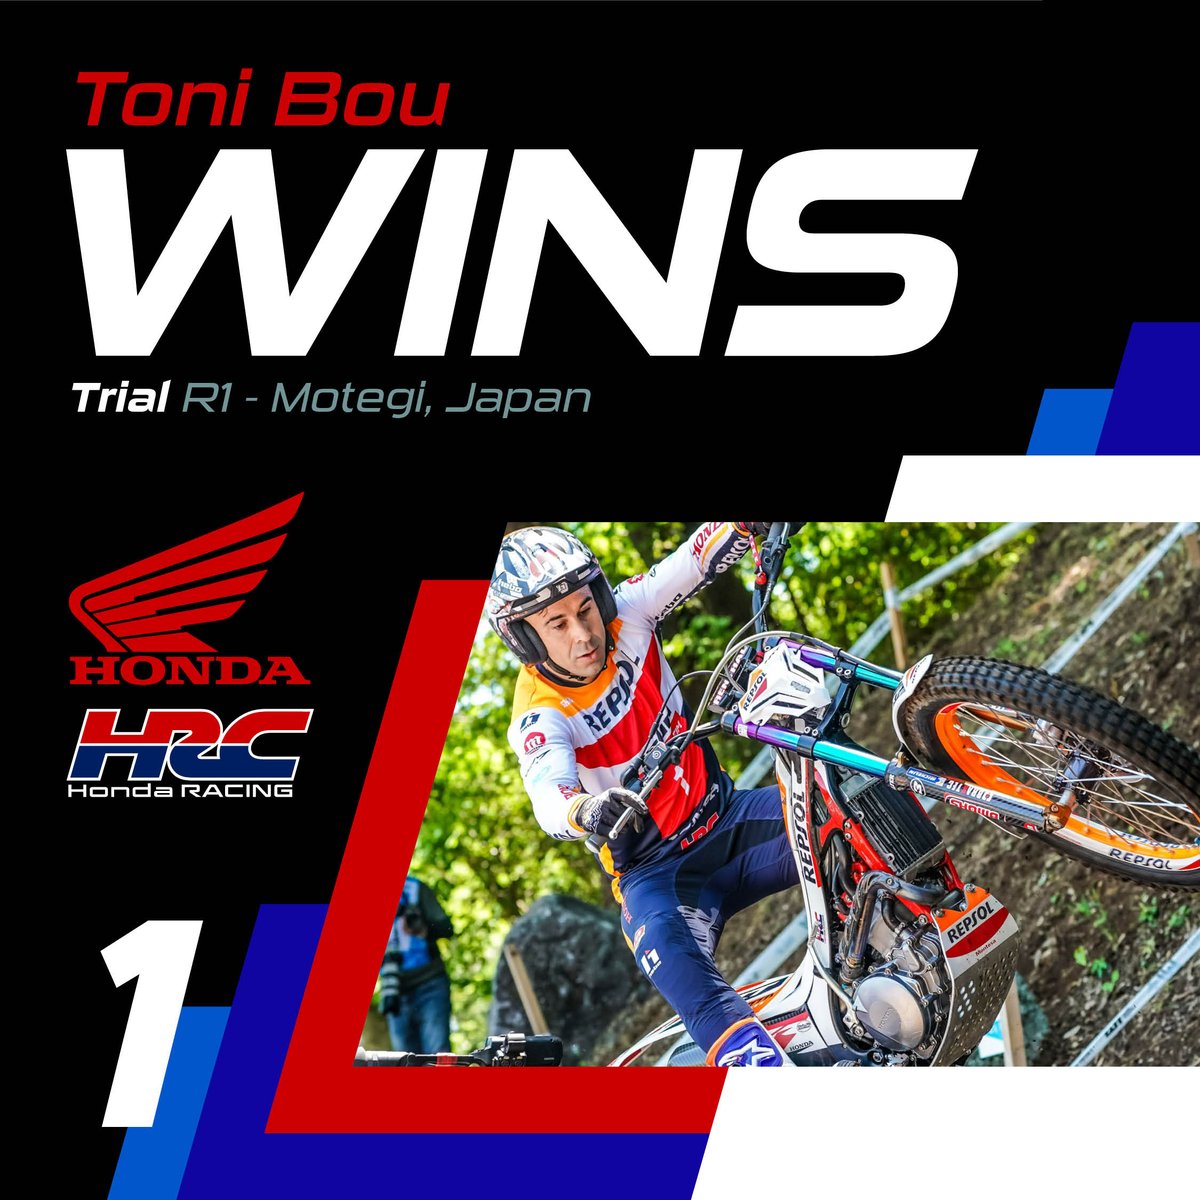 That's another win in the bag for Toni Bou 💪 #Honda #TrialGP